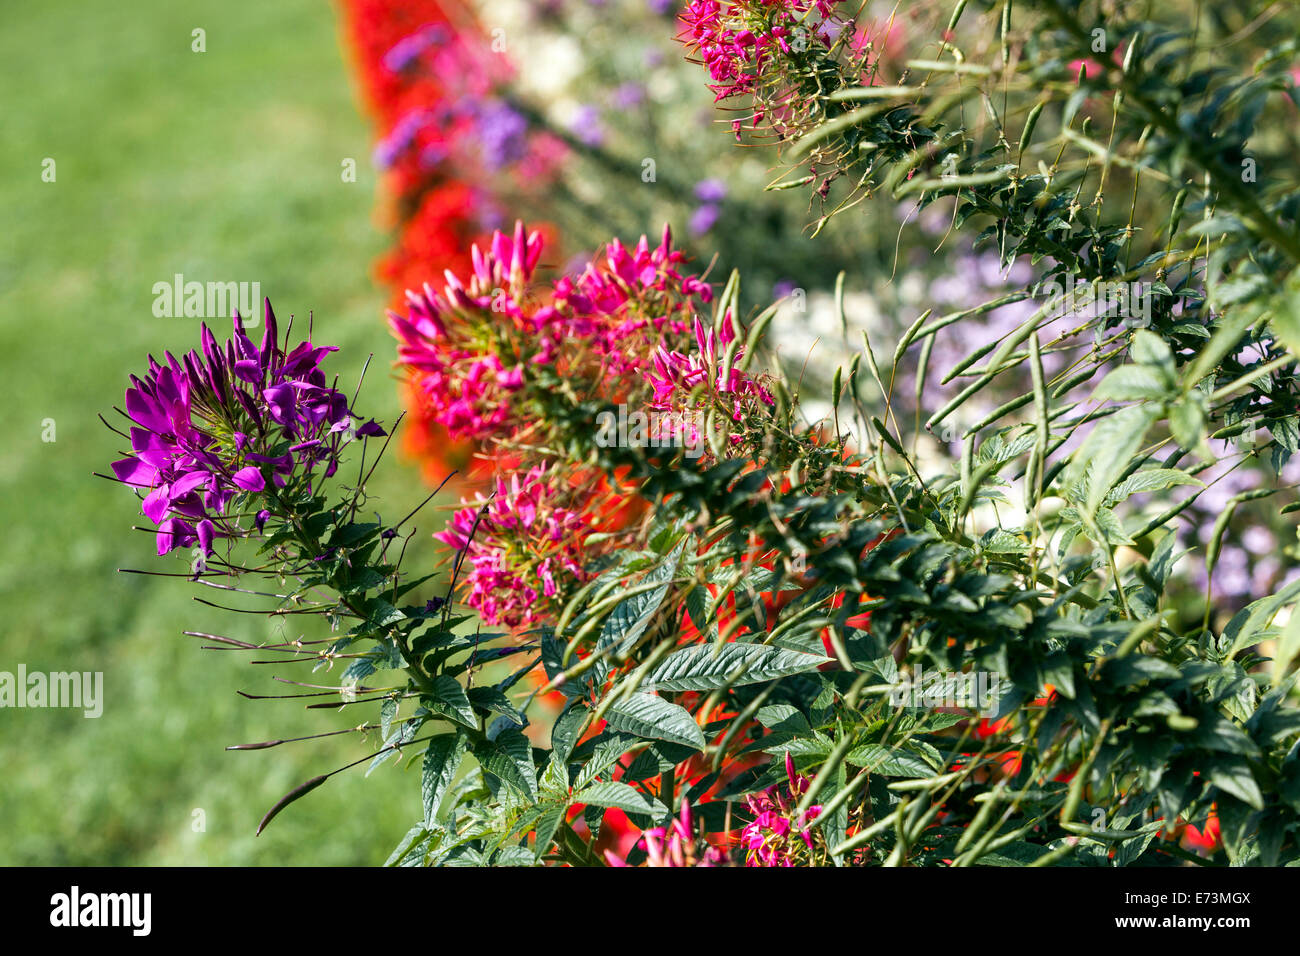 Cleome spinosa, Spider flower growing in a garden Stock Photo